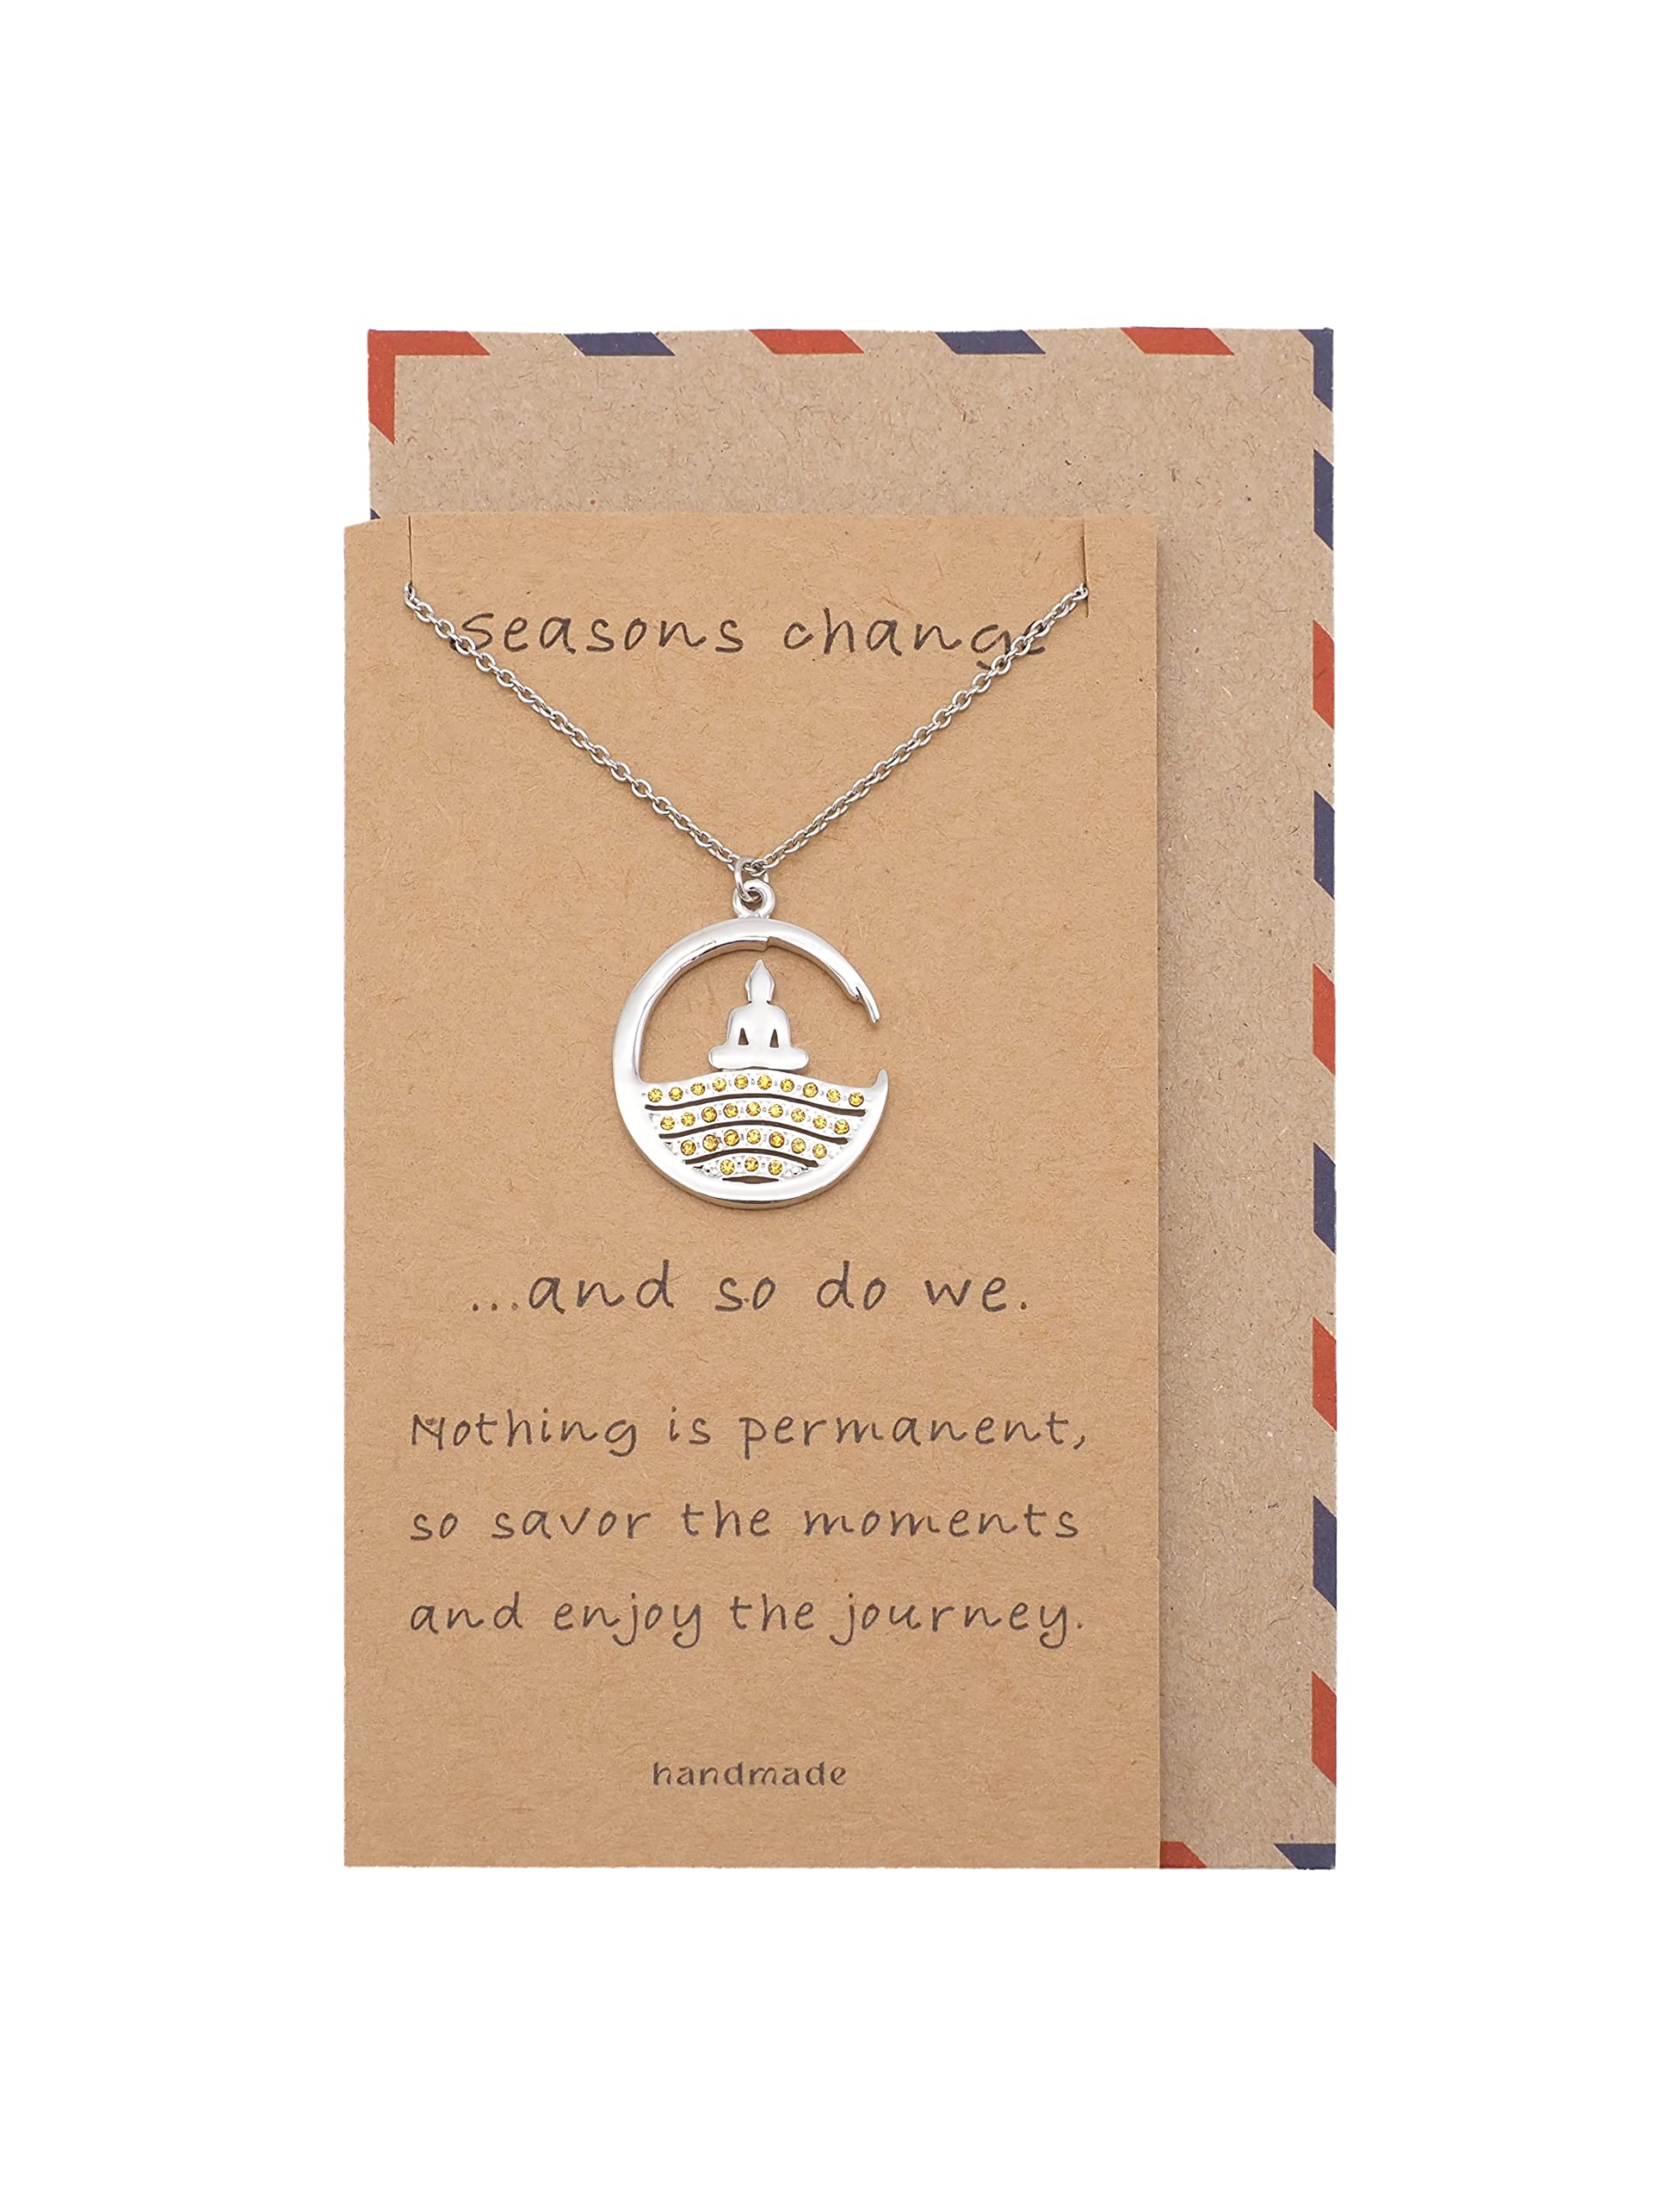 Anicca Buddha Orange Crystals Pendant Necklace Inspirational Quotes Jewelry Greeting Card